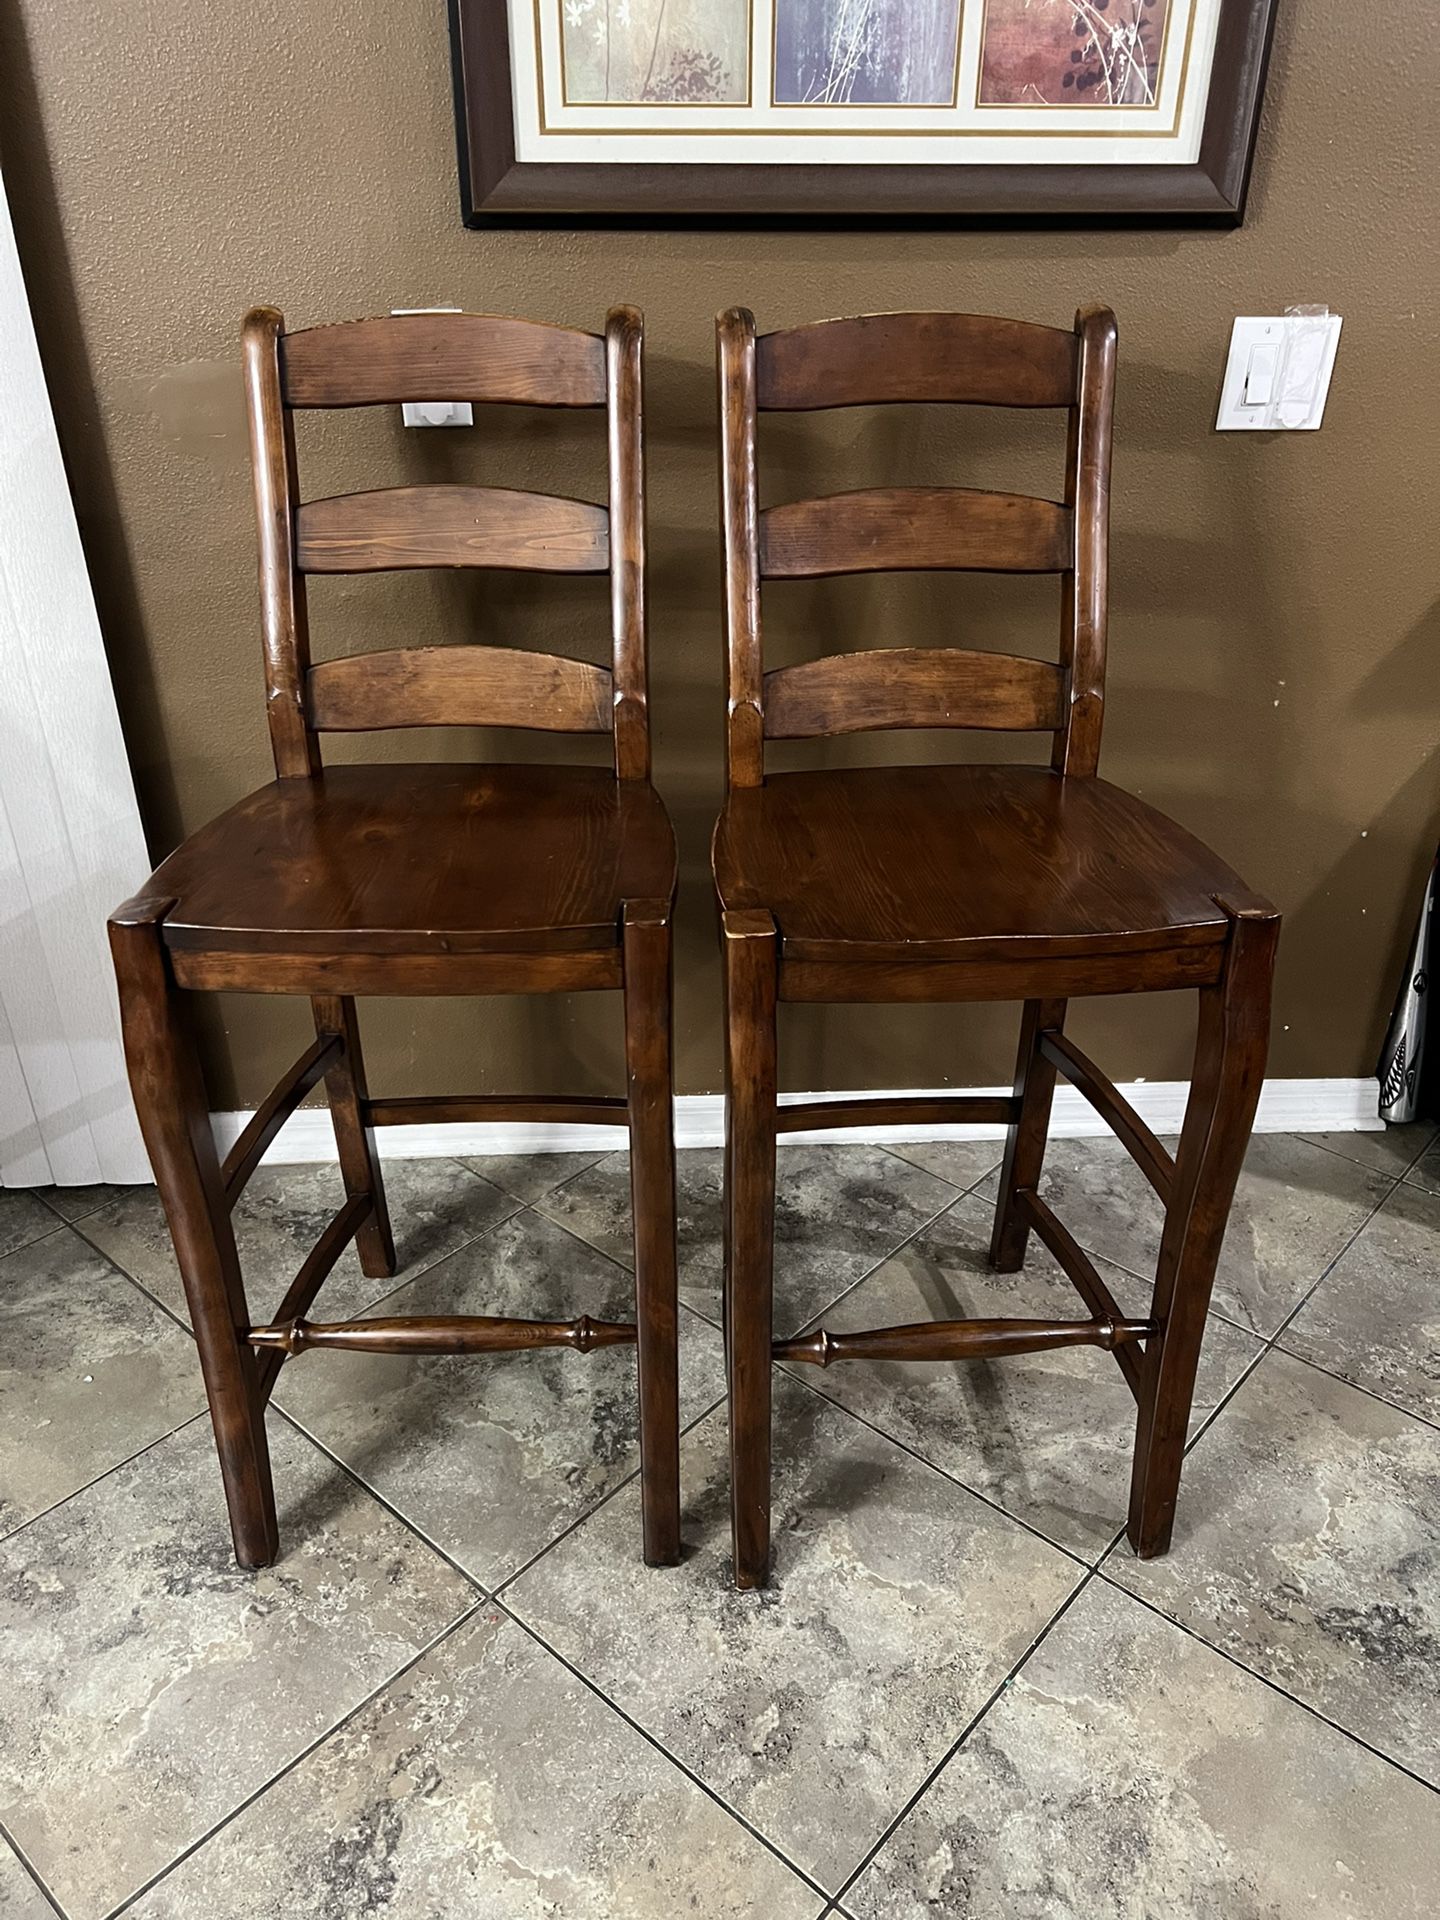 Pottery Barn Wynn Wooden Bar Stools Tall Chestnut Very Nice.  Originally based on the Windsor design, the ladder-back barstool has become an American 